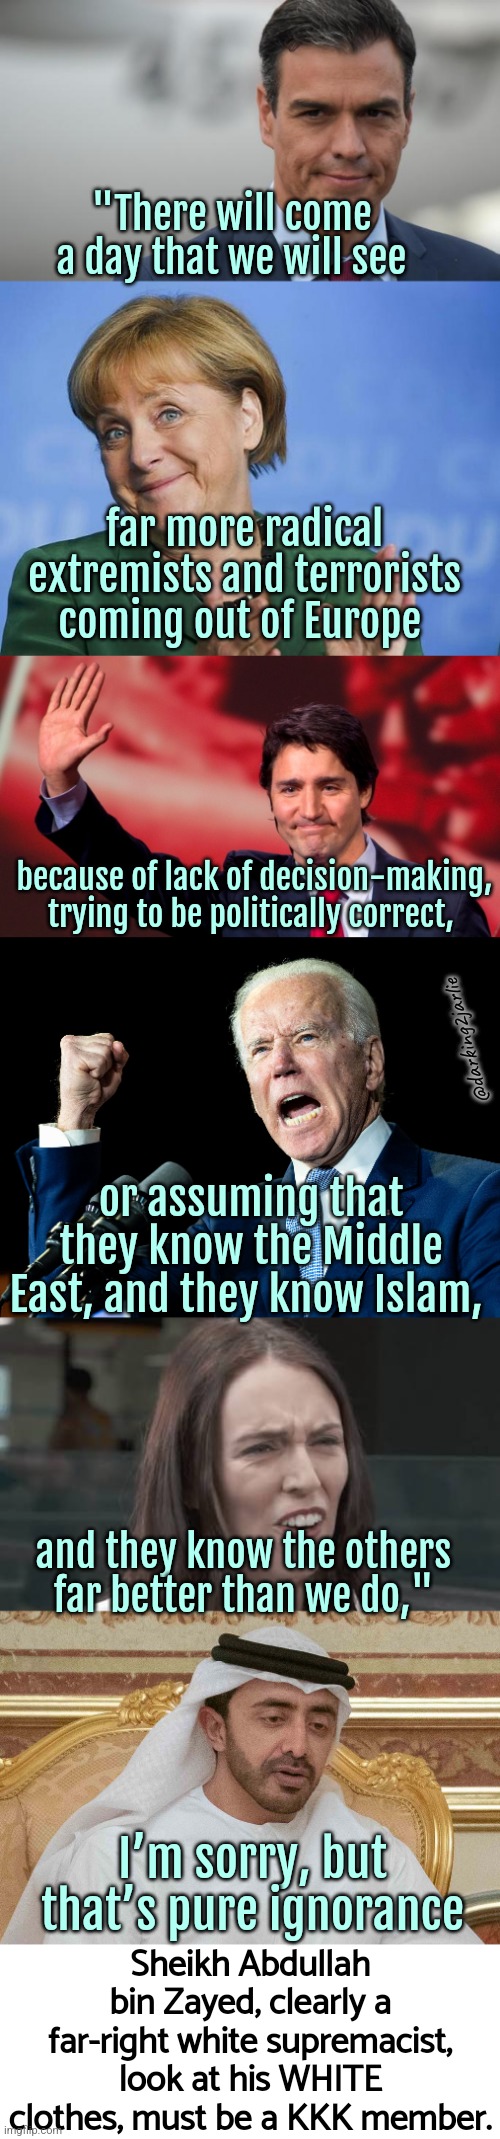 Master Libs know everything! | "There will come a day that we will see; far more radical extremists and terrorists coming out of Europe; because of lack of decision-making, trying to be politically correct, @darking2jarlie; or assuming that they know the Middle East, and they know Islam, and they know the others far better than we do,"; Sheikh Abdullah bin Zayed, clearly a far-right white supremacist, look at his WHITE clothes, must be a KKK member. I’m sorry, but that’s pure ignorance | image tagged in liberals,liberal logic,america,europe,islam,canada | made w/ Imgflip meme maker